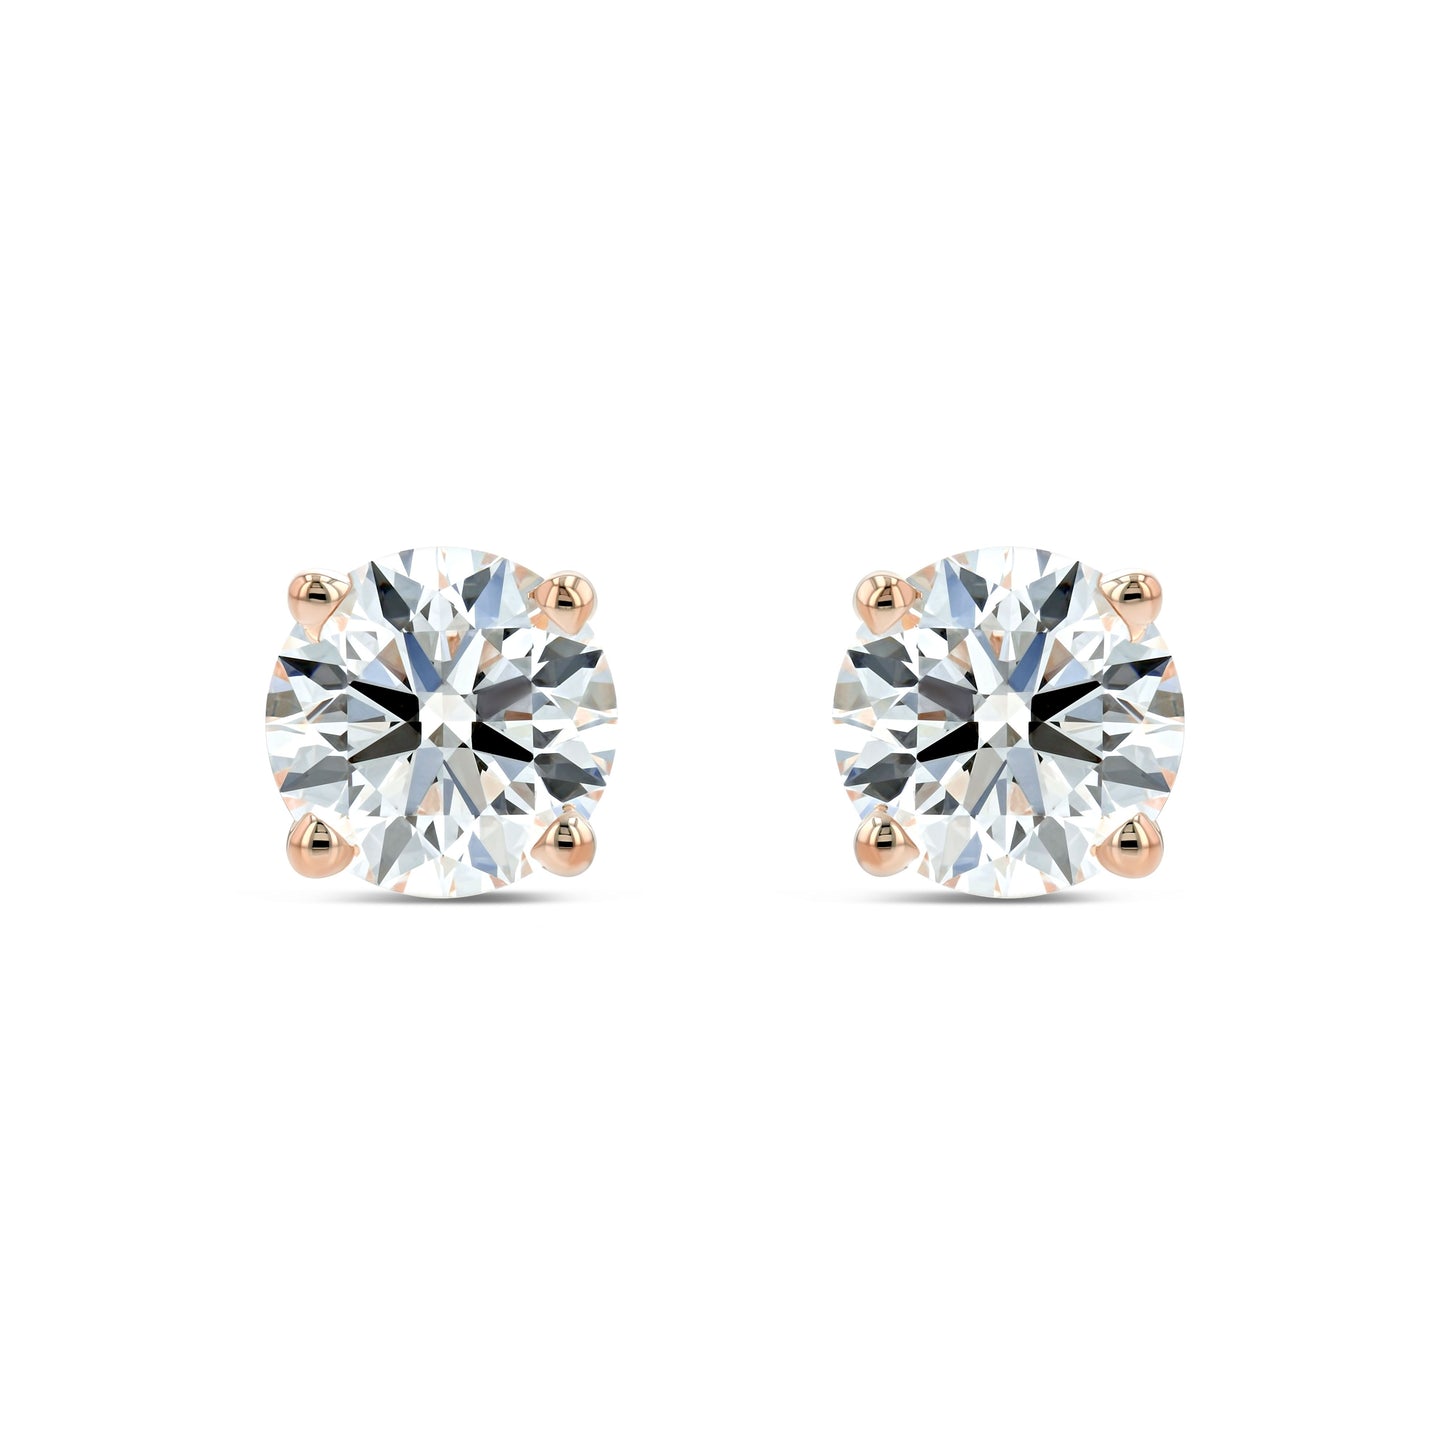 14k Rose Gold 4-prong Round Diamond Stud Earrings 1/2ctw (4.0mm Ea), G-h Color, I1 Clarity